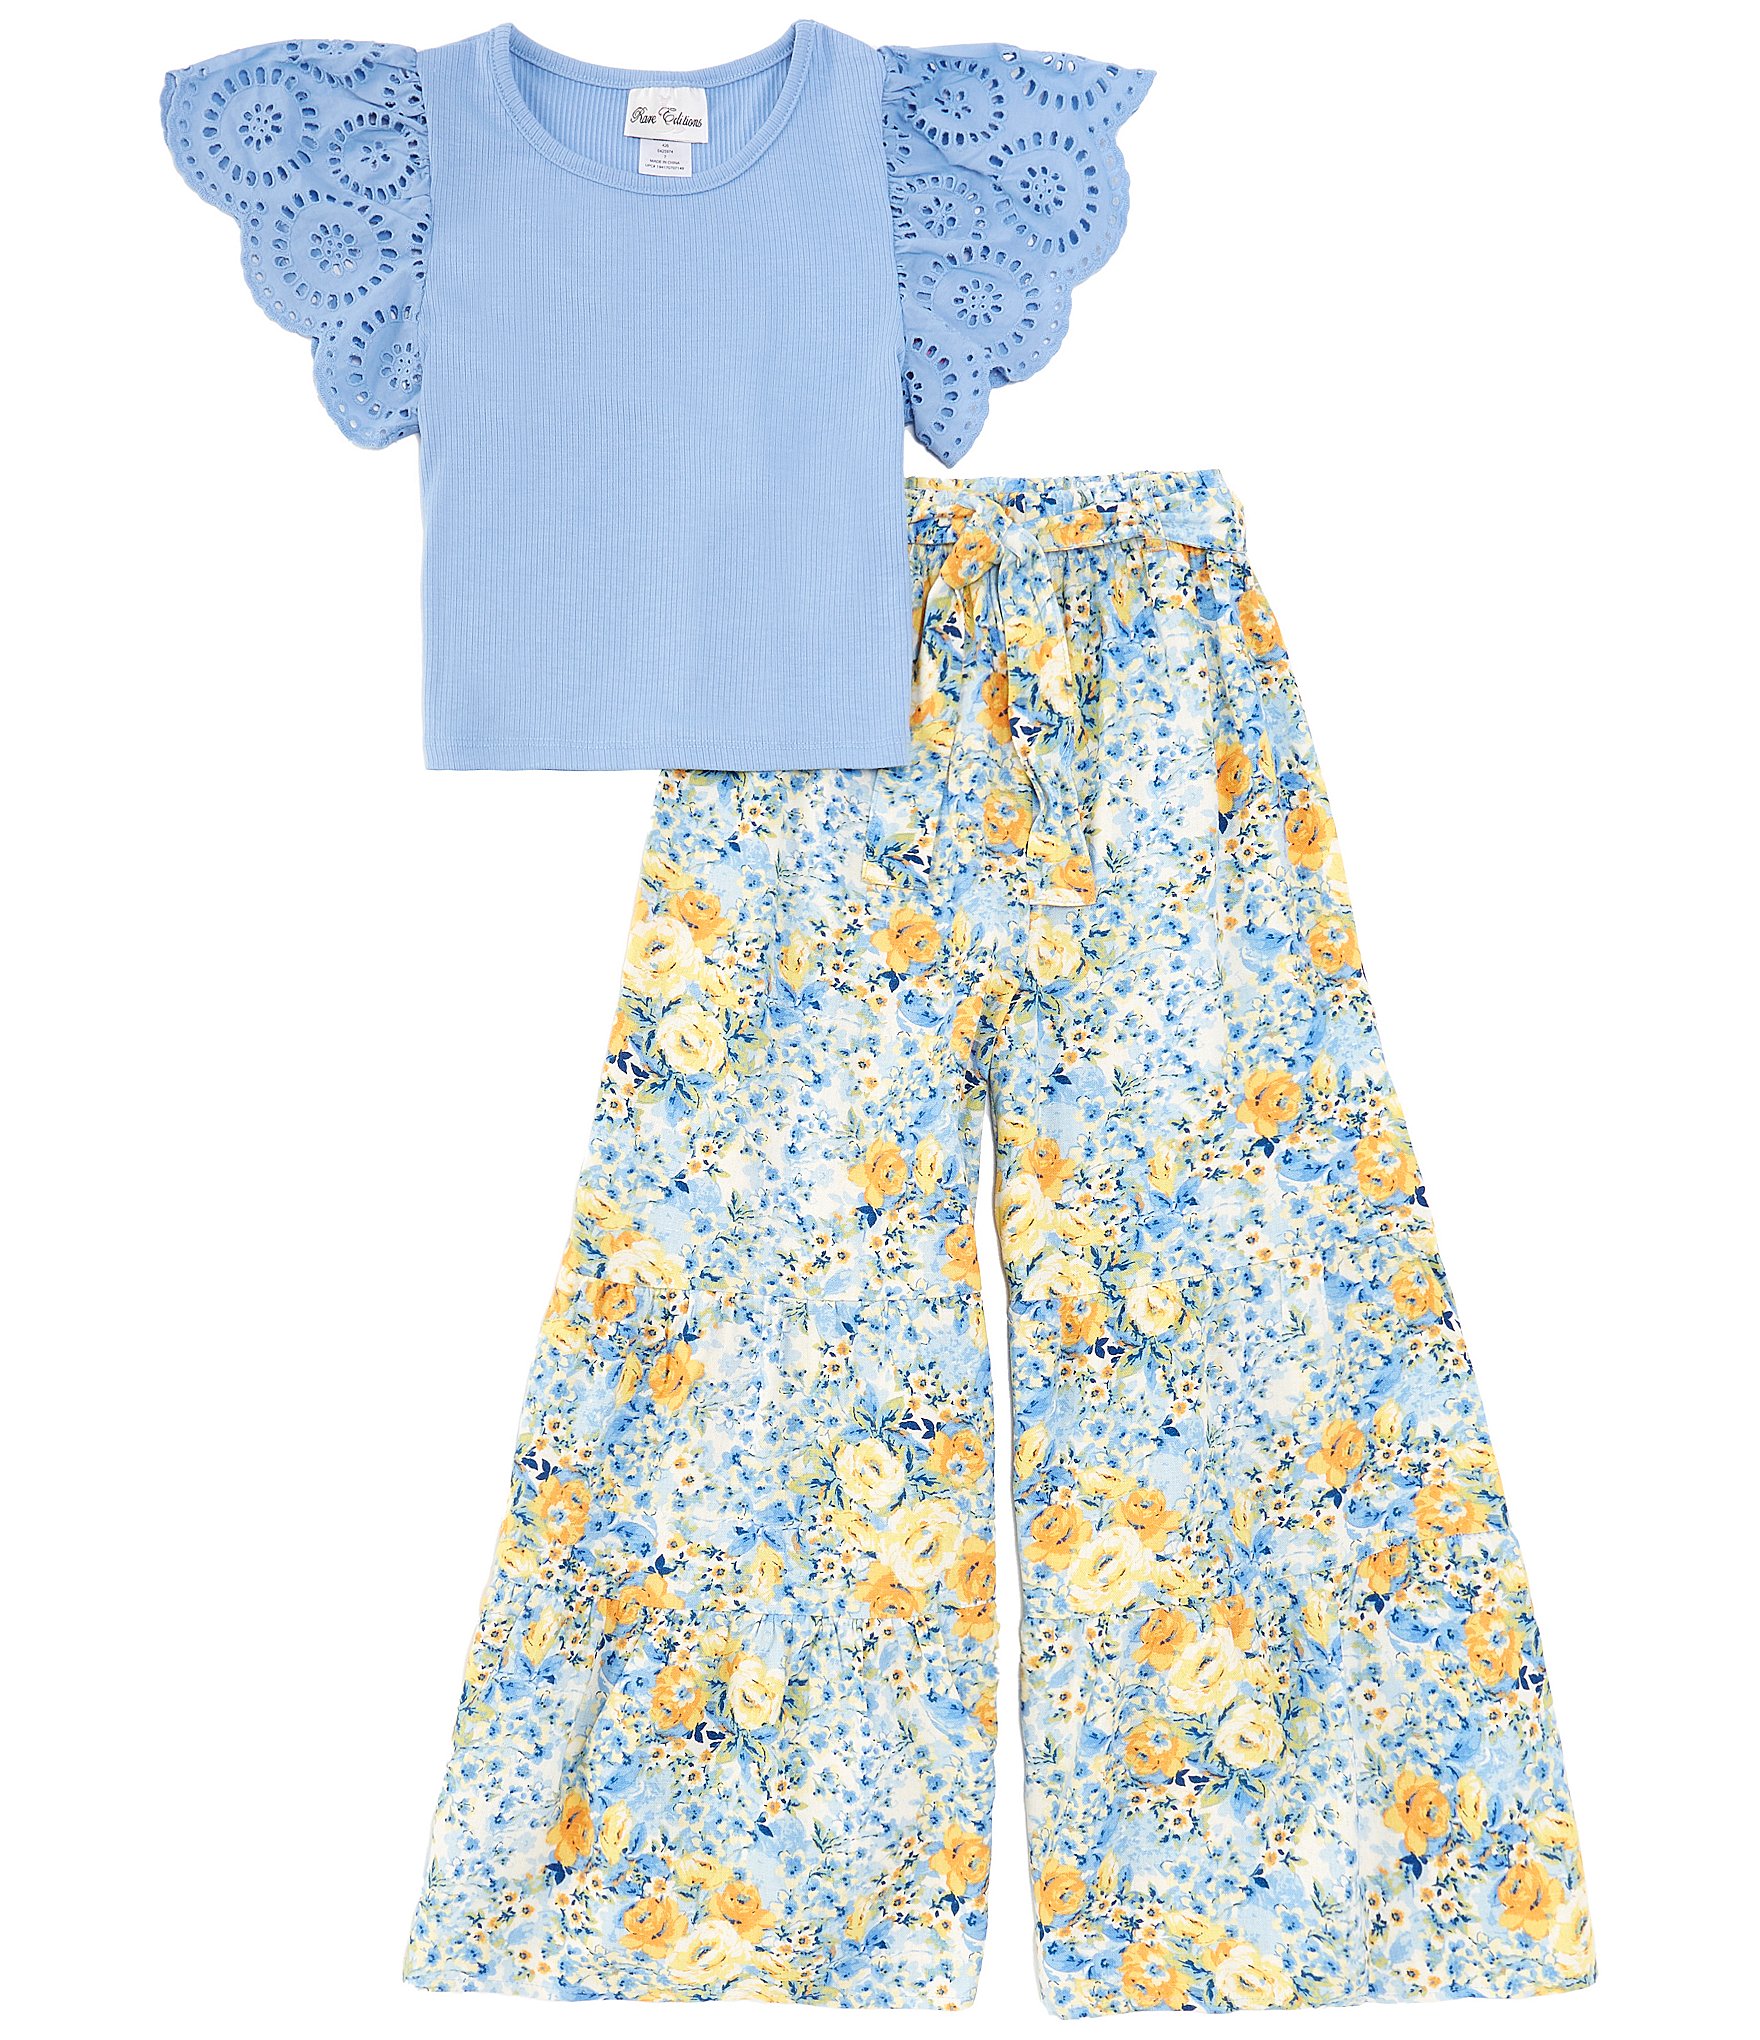 Little Girls' Outfit Sets